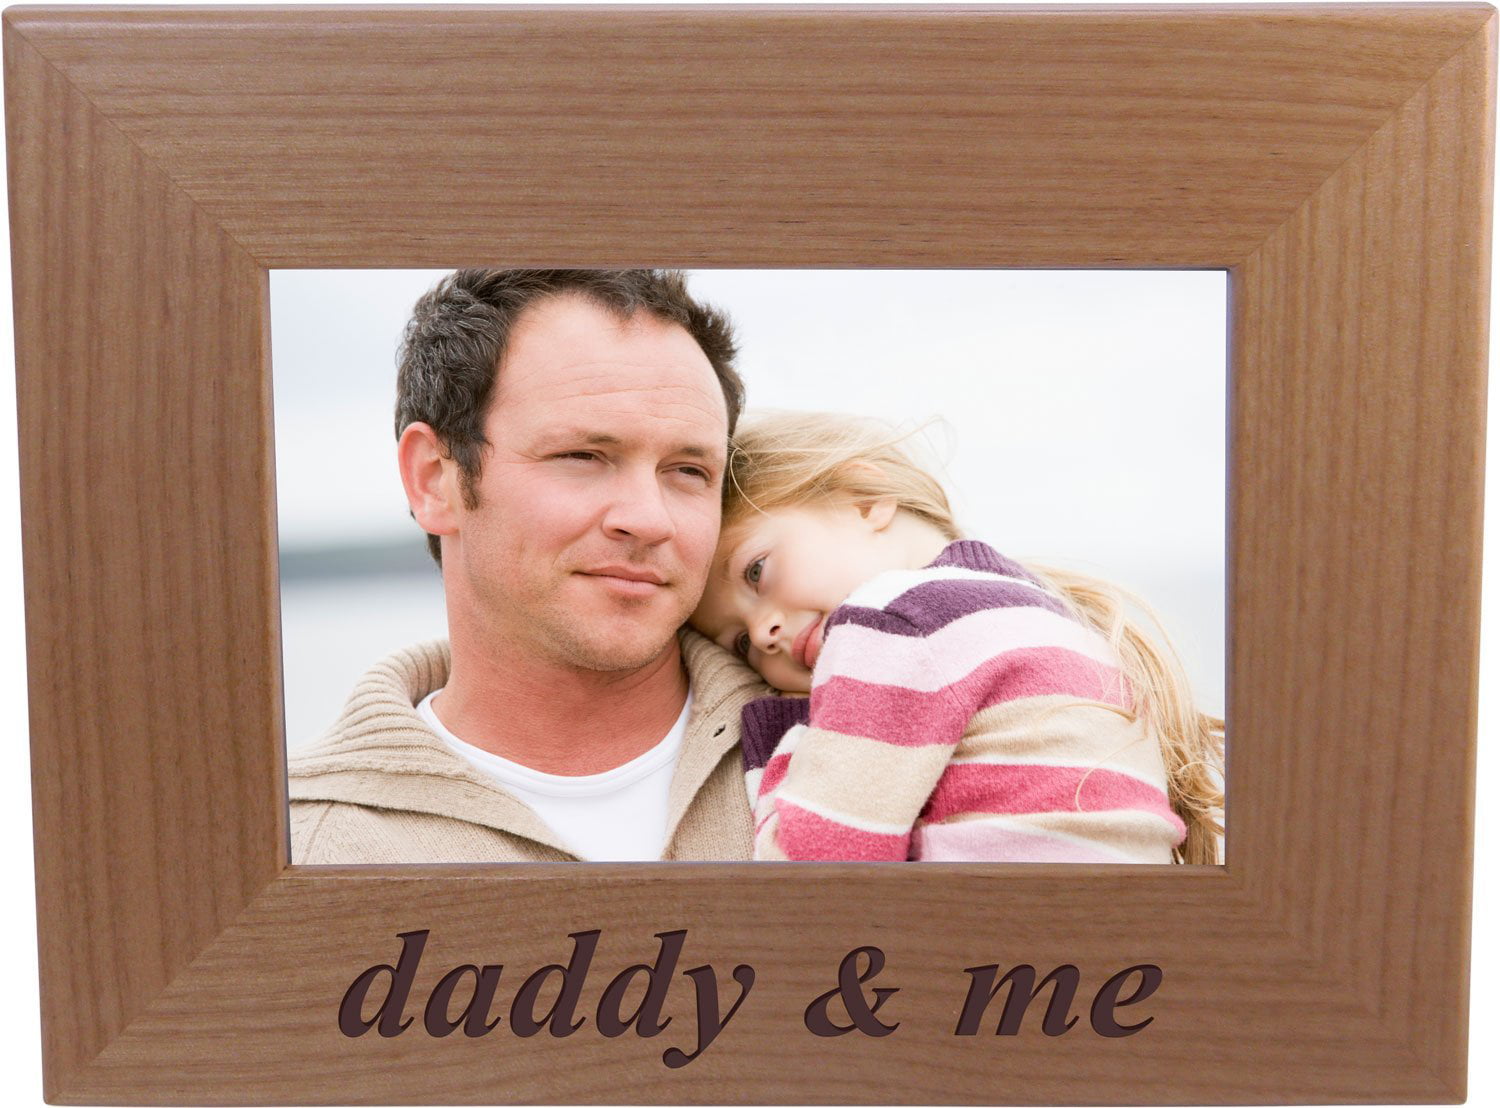 holds 4x6 inch picture My dad & me glass photo frame 